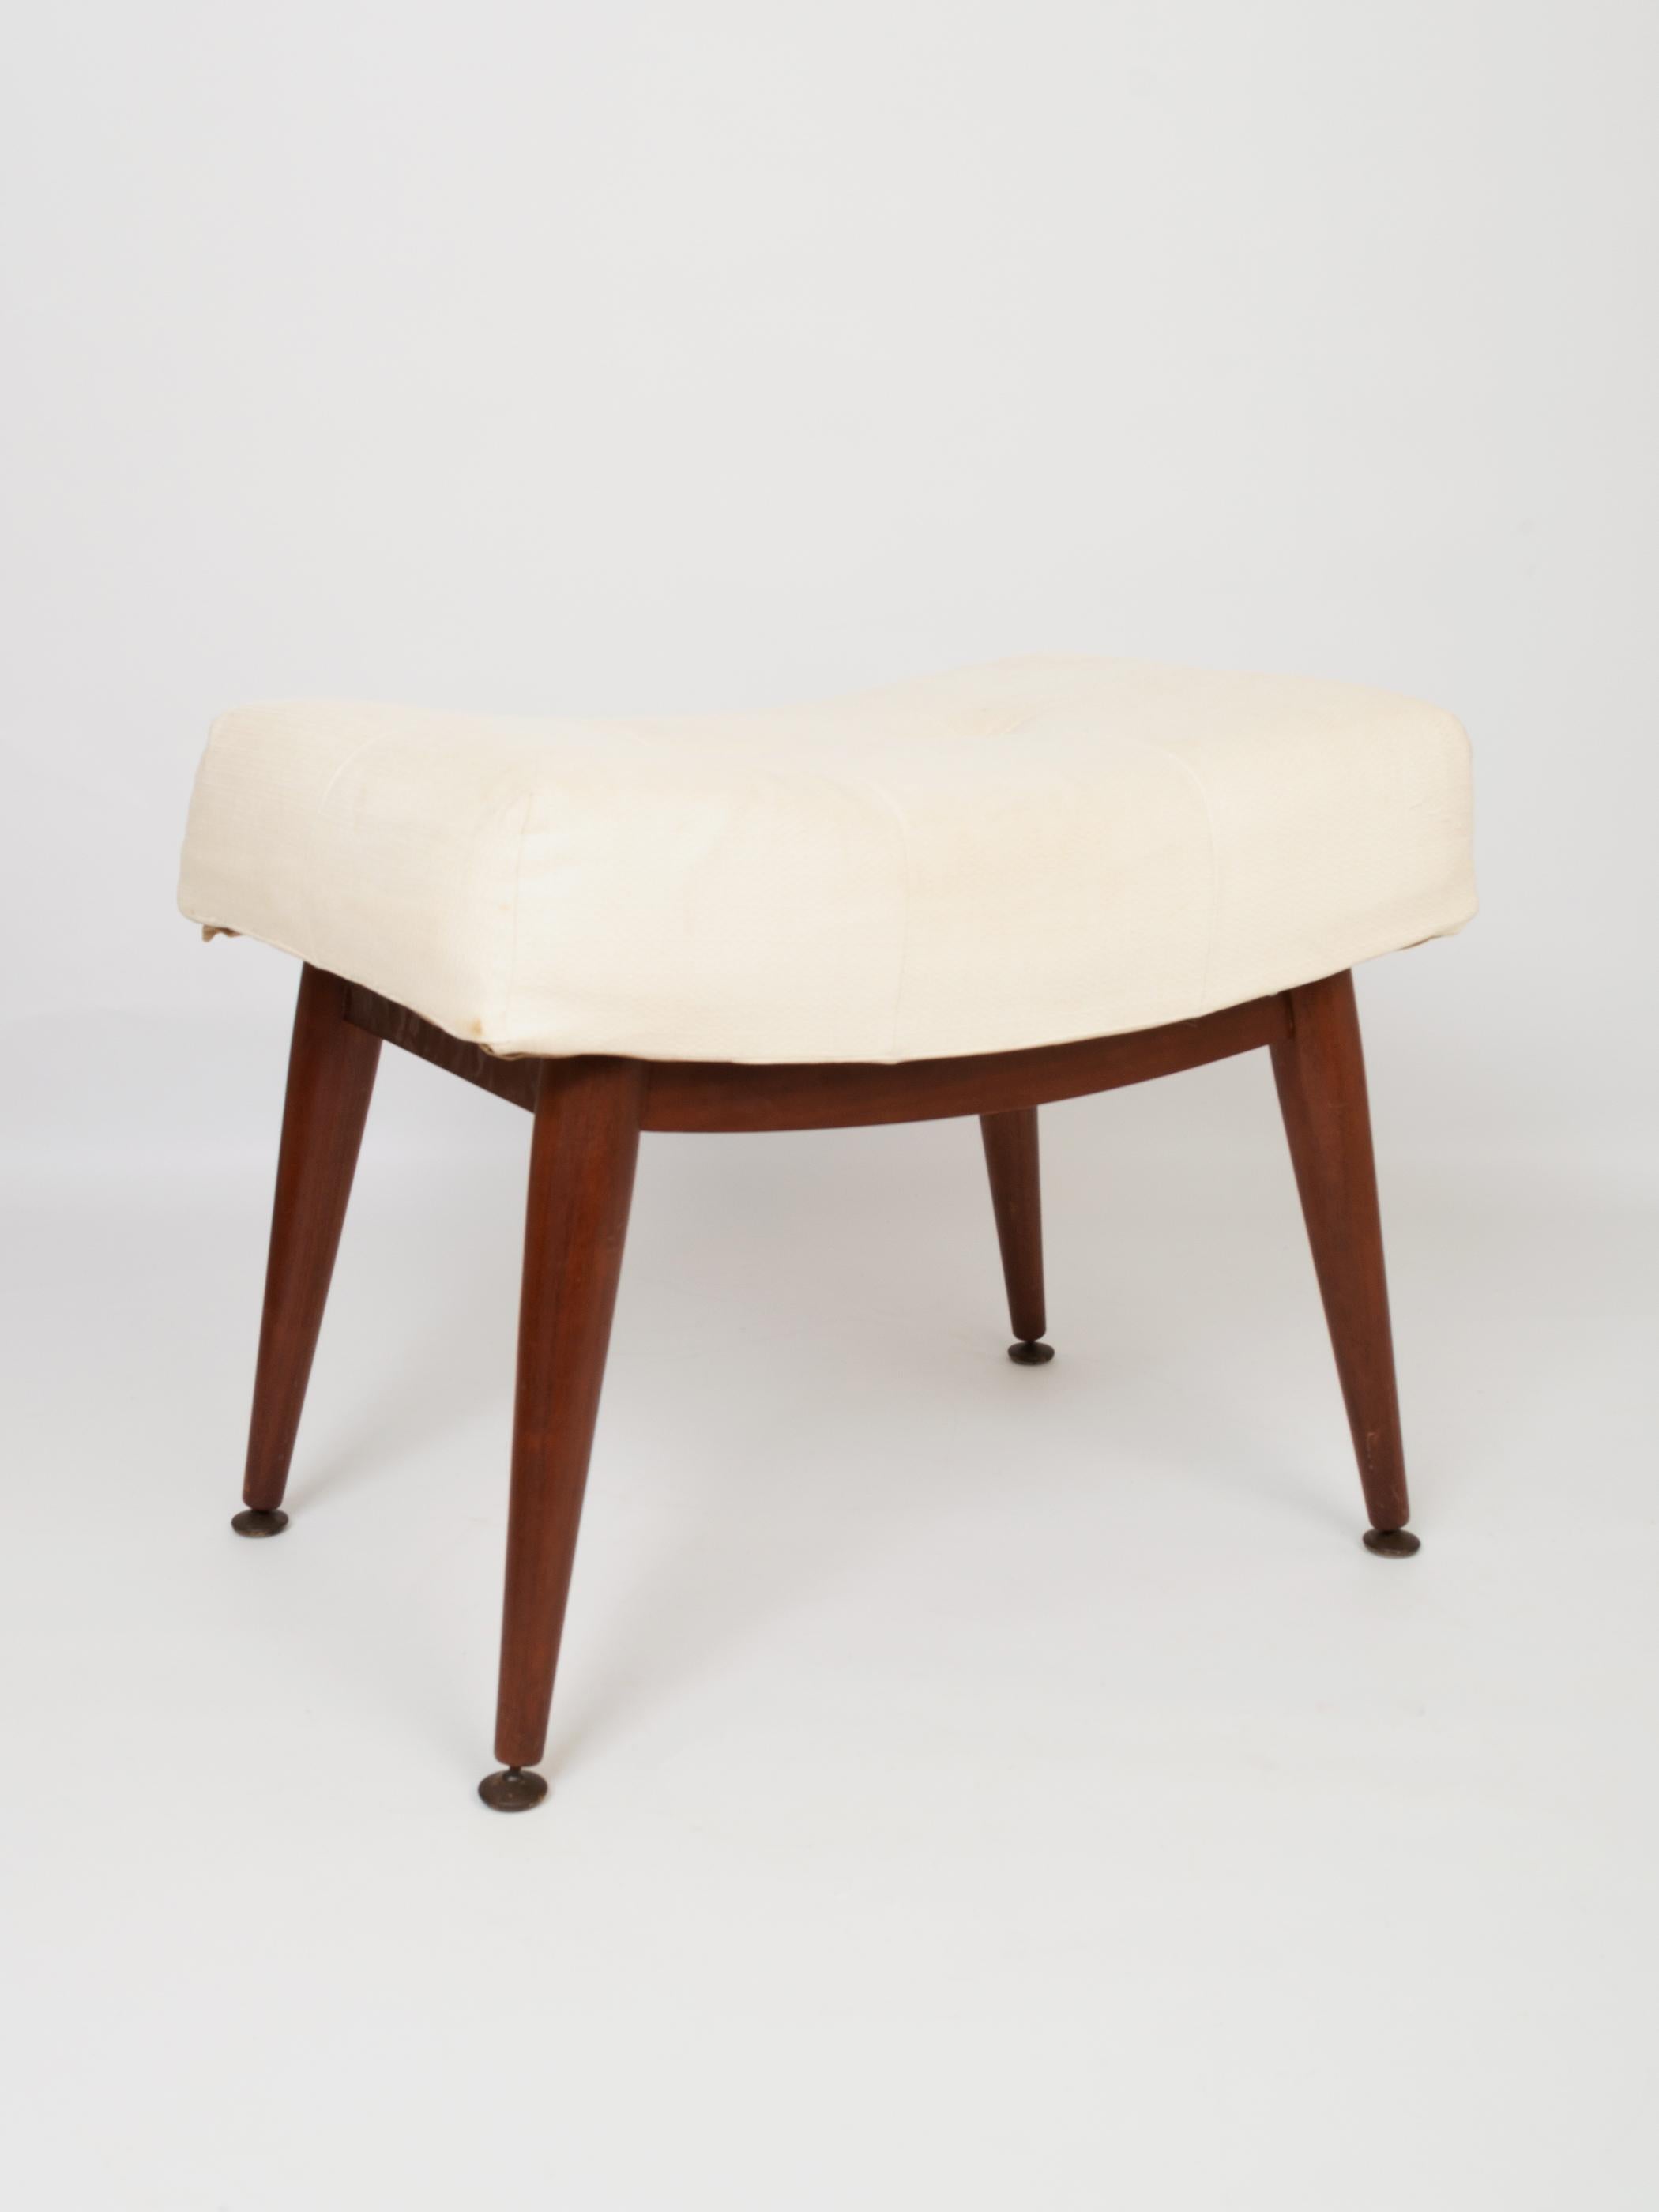 A mid century teak upholstered ottoman stool, England C.1960.

Presented in excellent used condition.